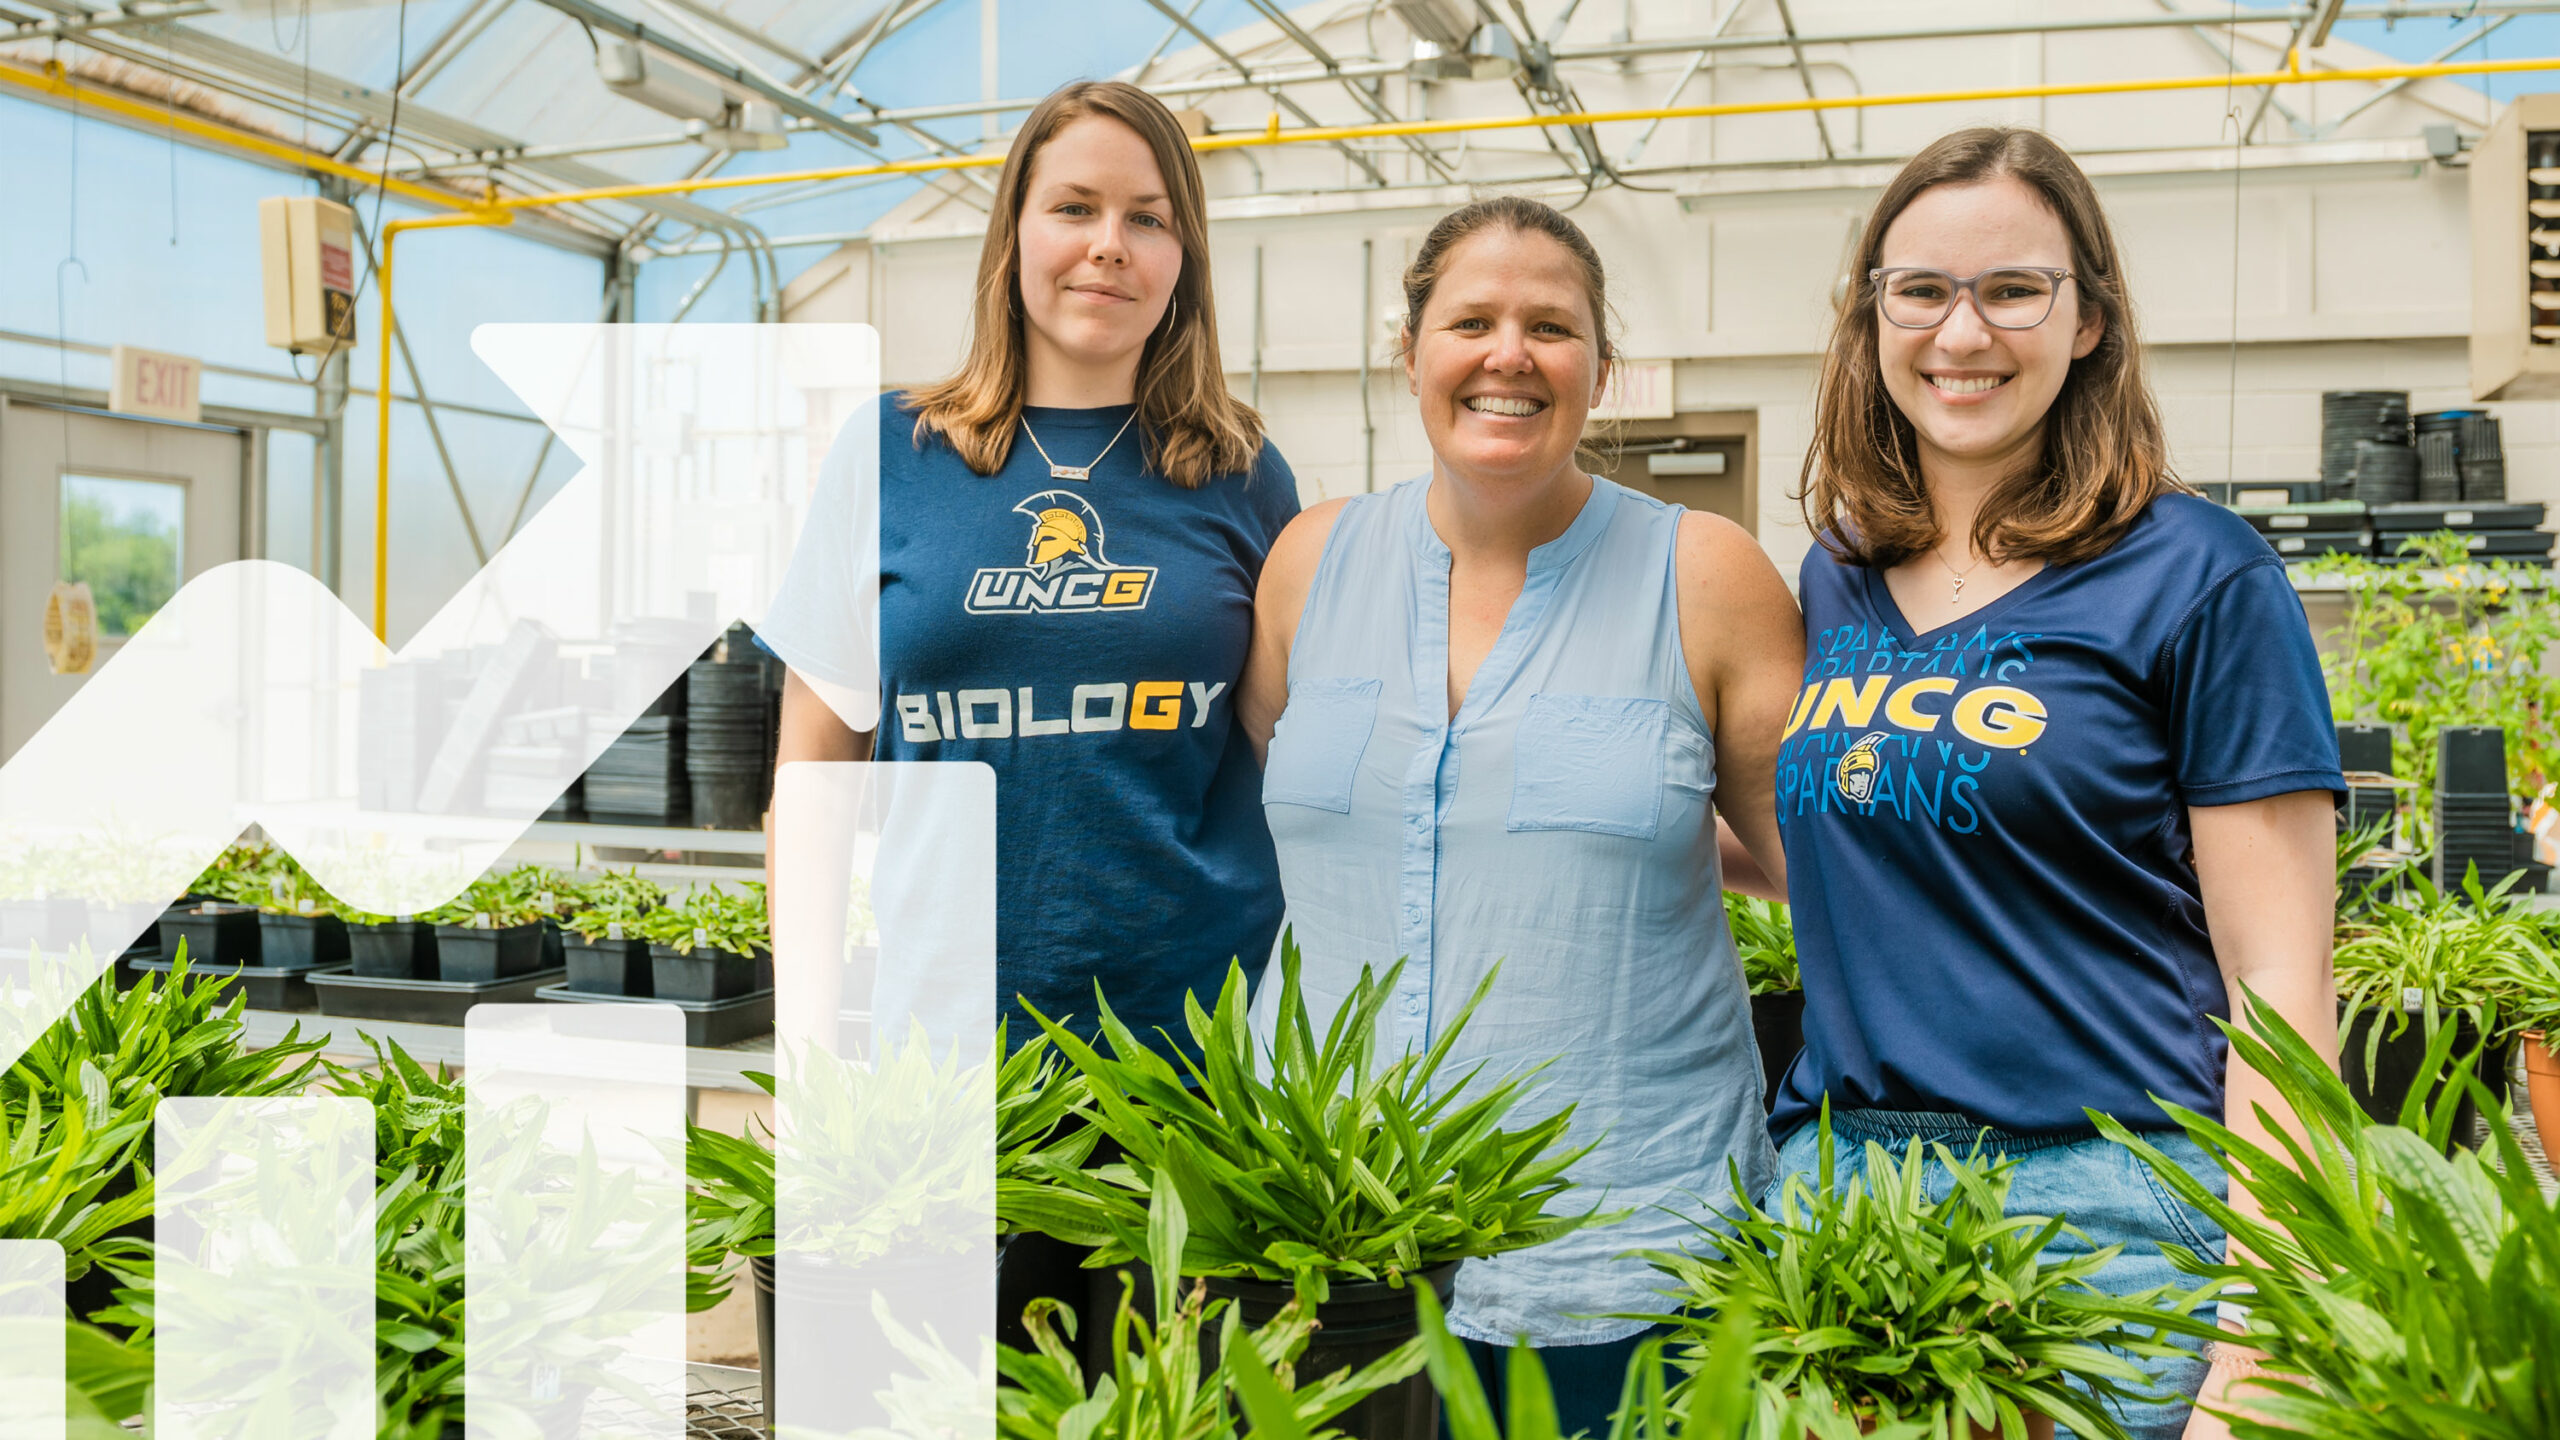 Photo by Jiyoung Park: Sally Koerner and her students in the Northridge Greenhouse